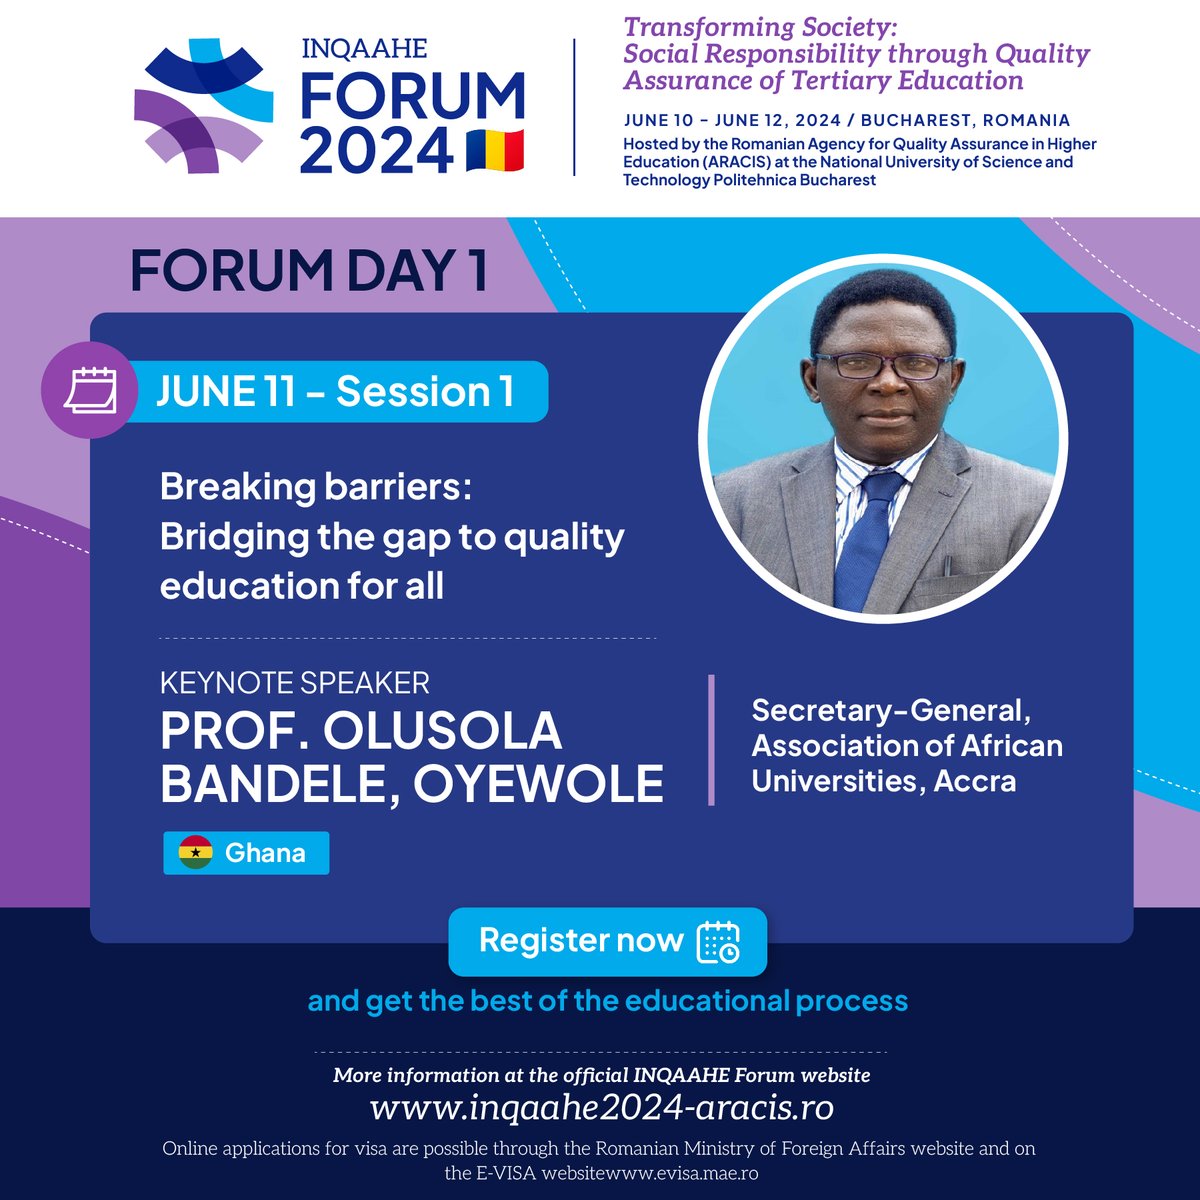 🗓️ Mark your calendars! We are honoured to announce that Prof. Olusola Bandele, OYEWOLE, Secretary-General of the Association of African Universities, will deliver a keynote address on June 11th (Session 1) of the upcoming #INQAAHEForum2024. More details: inqaahe.org/blog/forum-202…